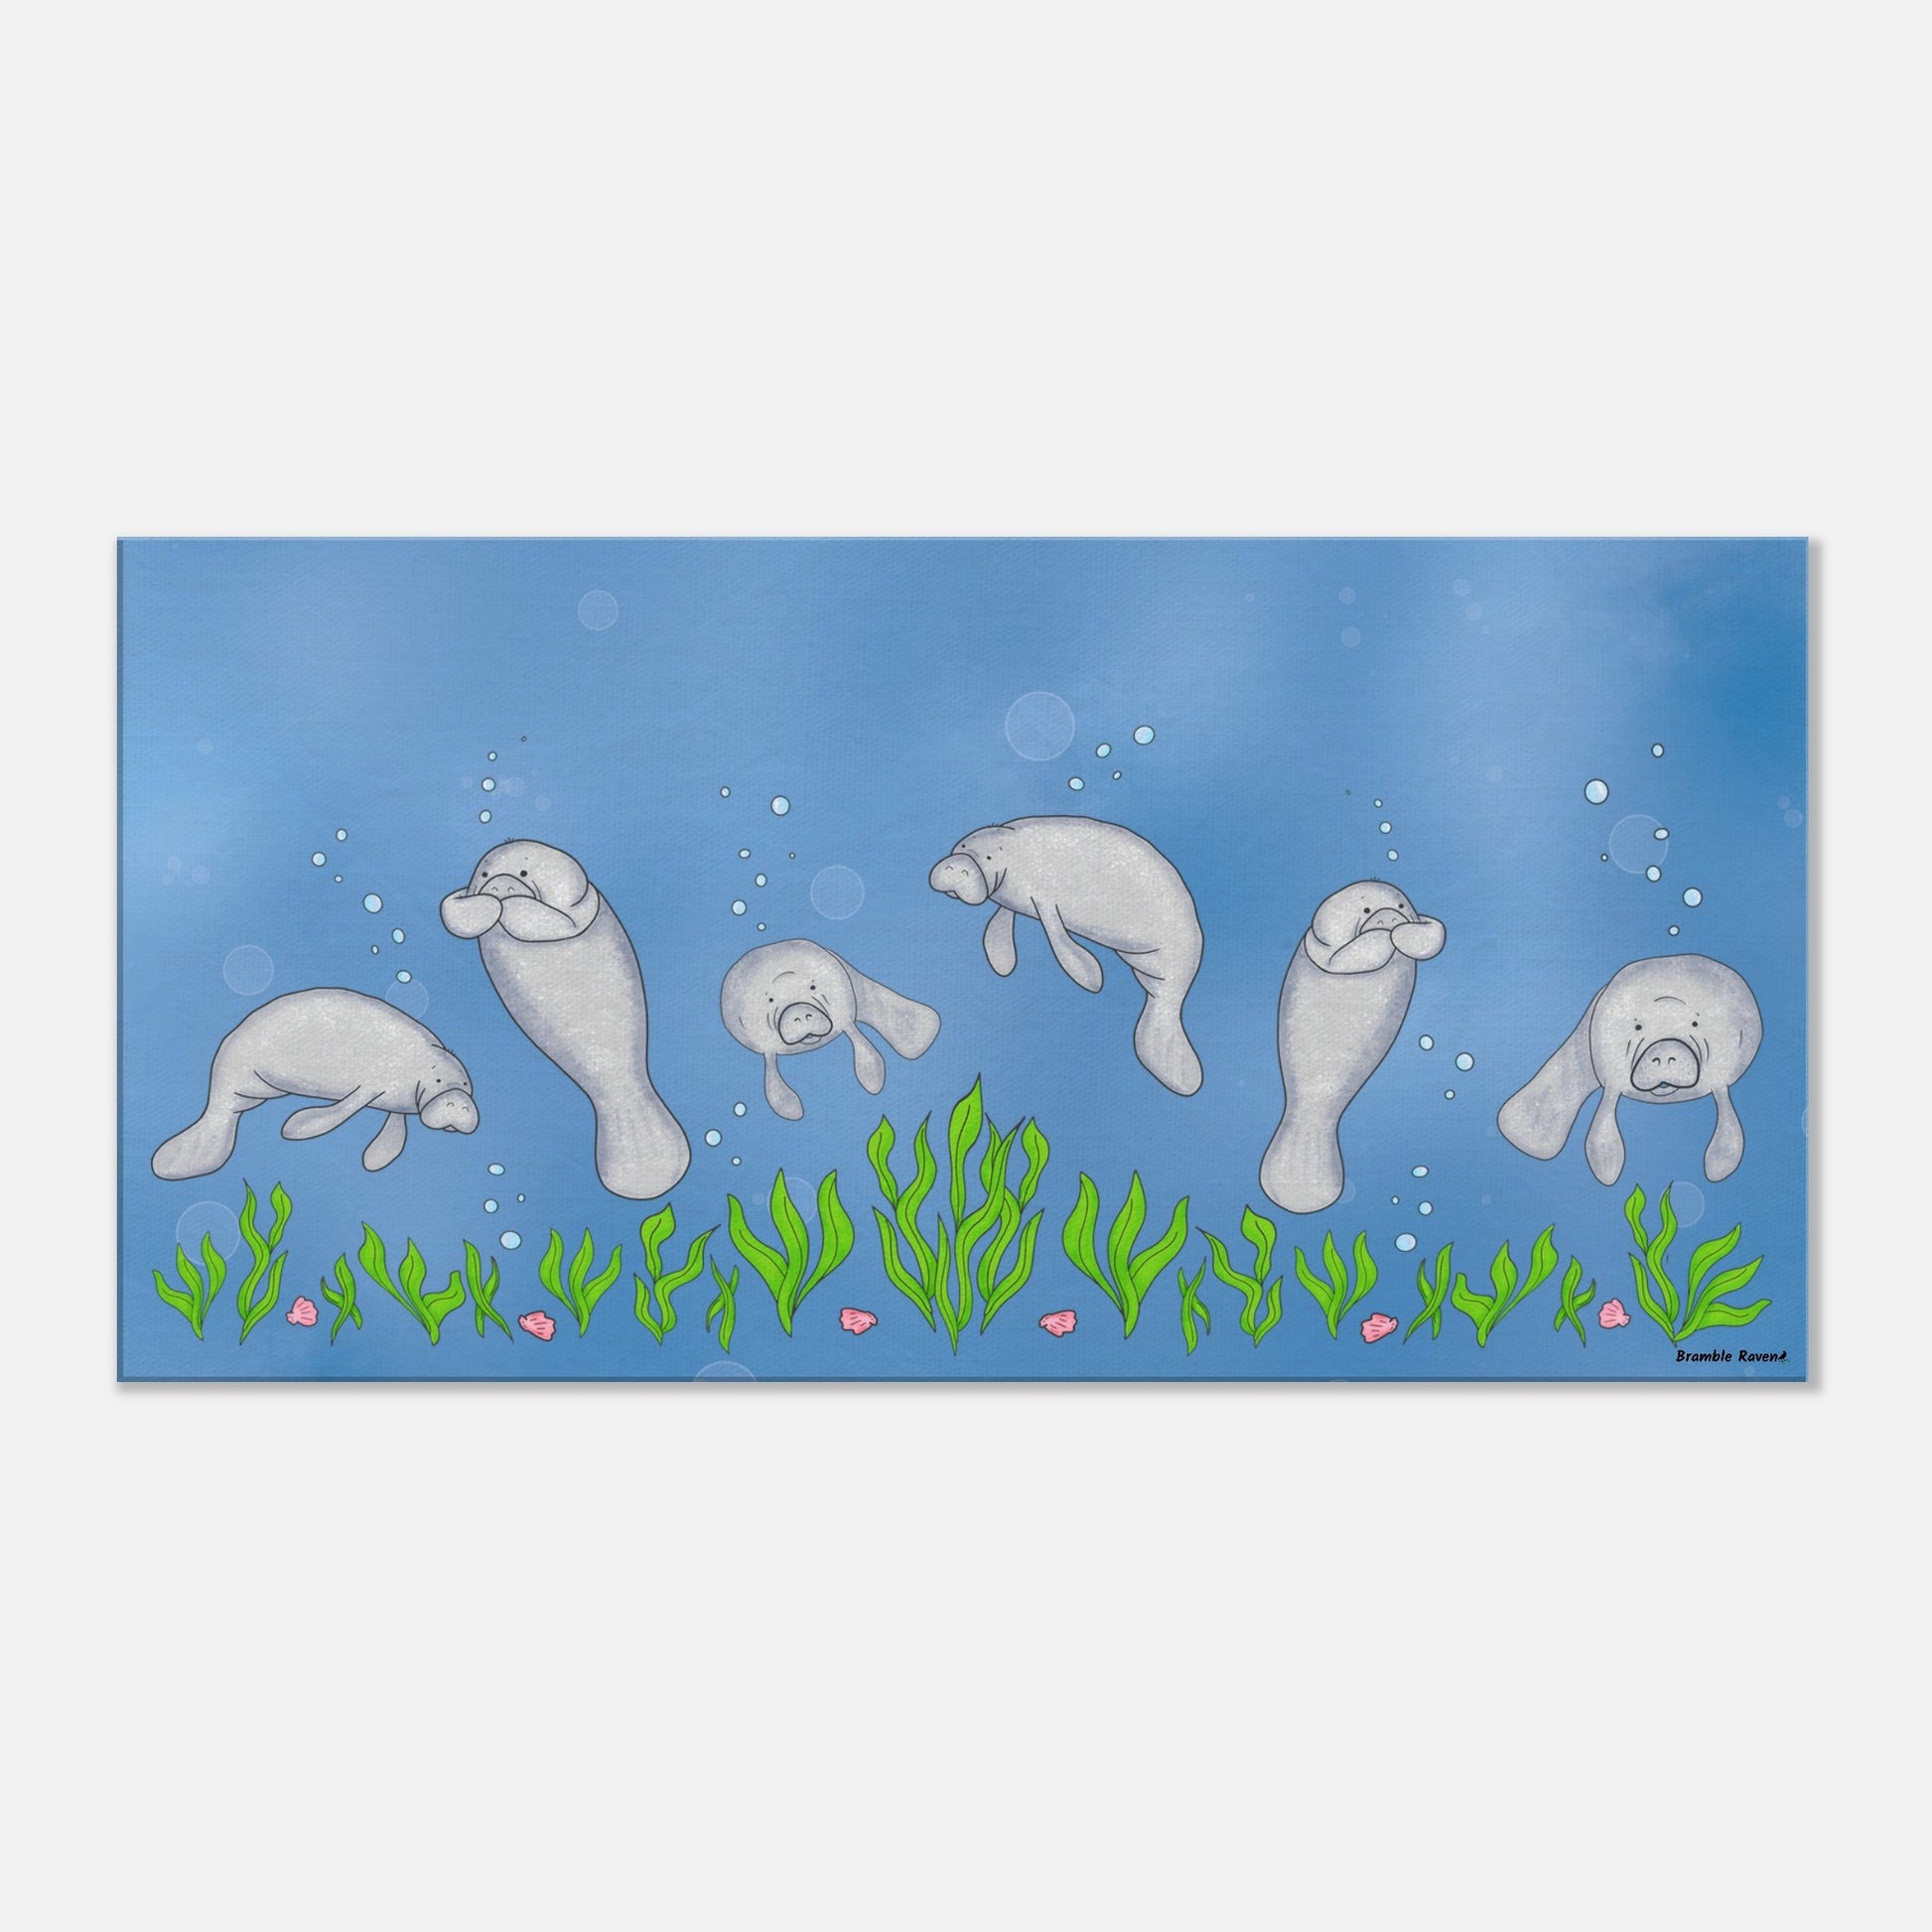 8 by 24 inch slim canvas wall art print featuring cute illustrated manatees swimming above the seabed. Hanging hardware included.